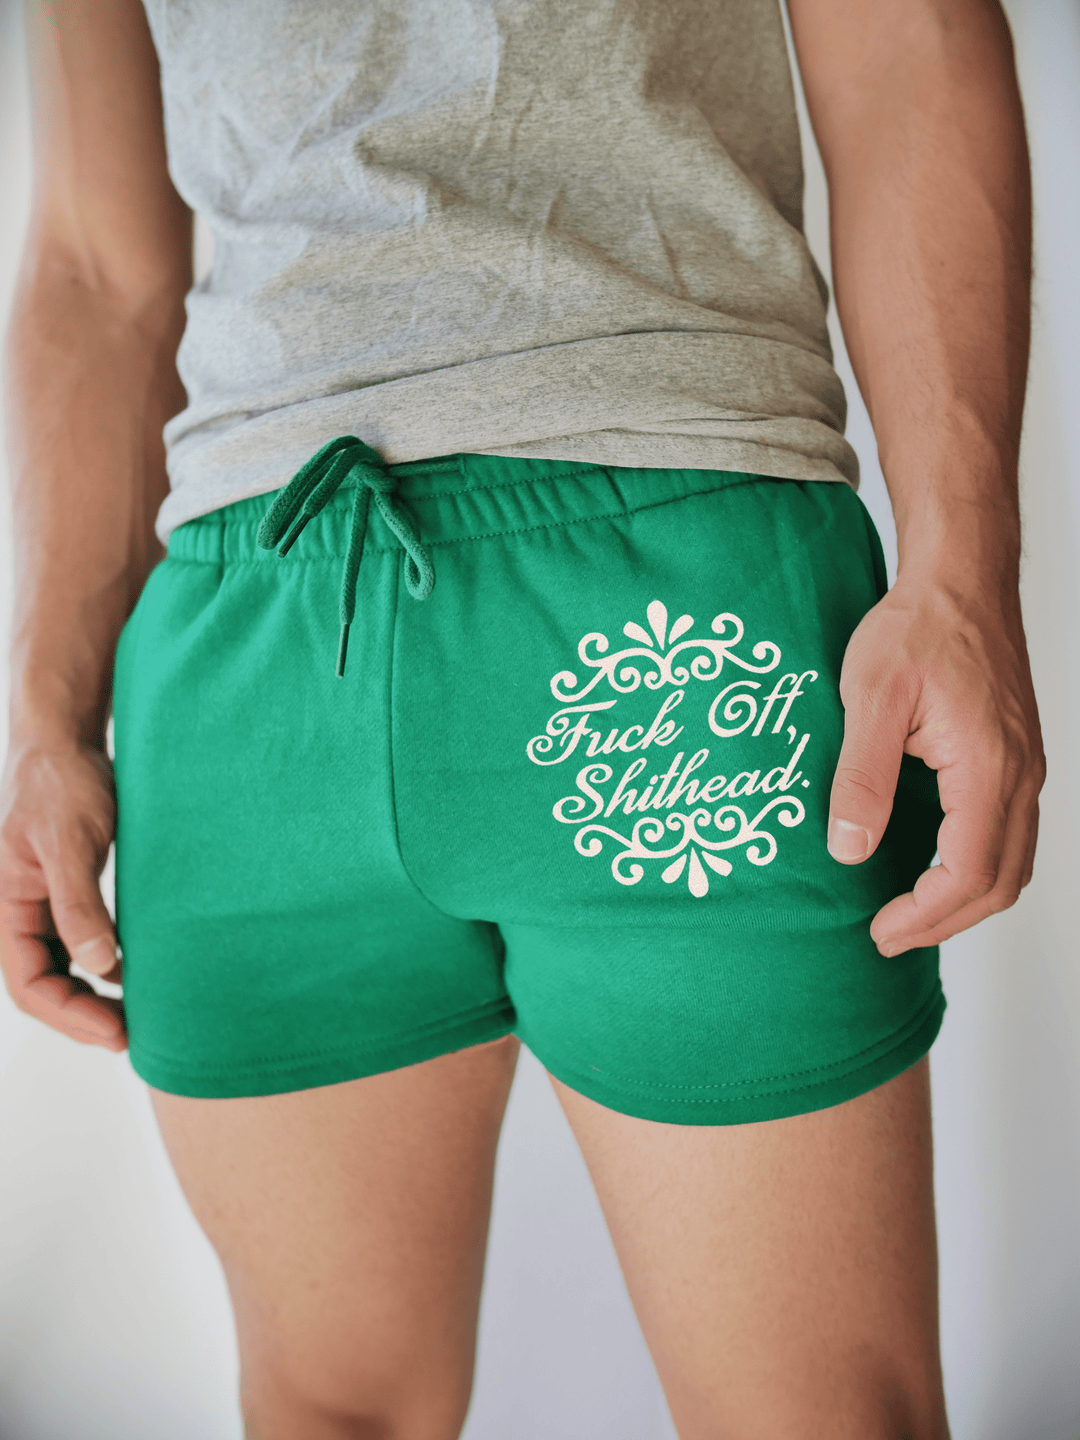 PixelThat Punderwear Shorts Kelly Green / S / Front F*ck Off Sh*thead Men's Gym Shorts